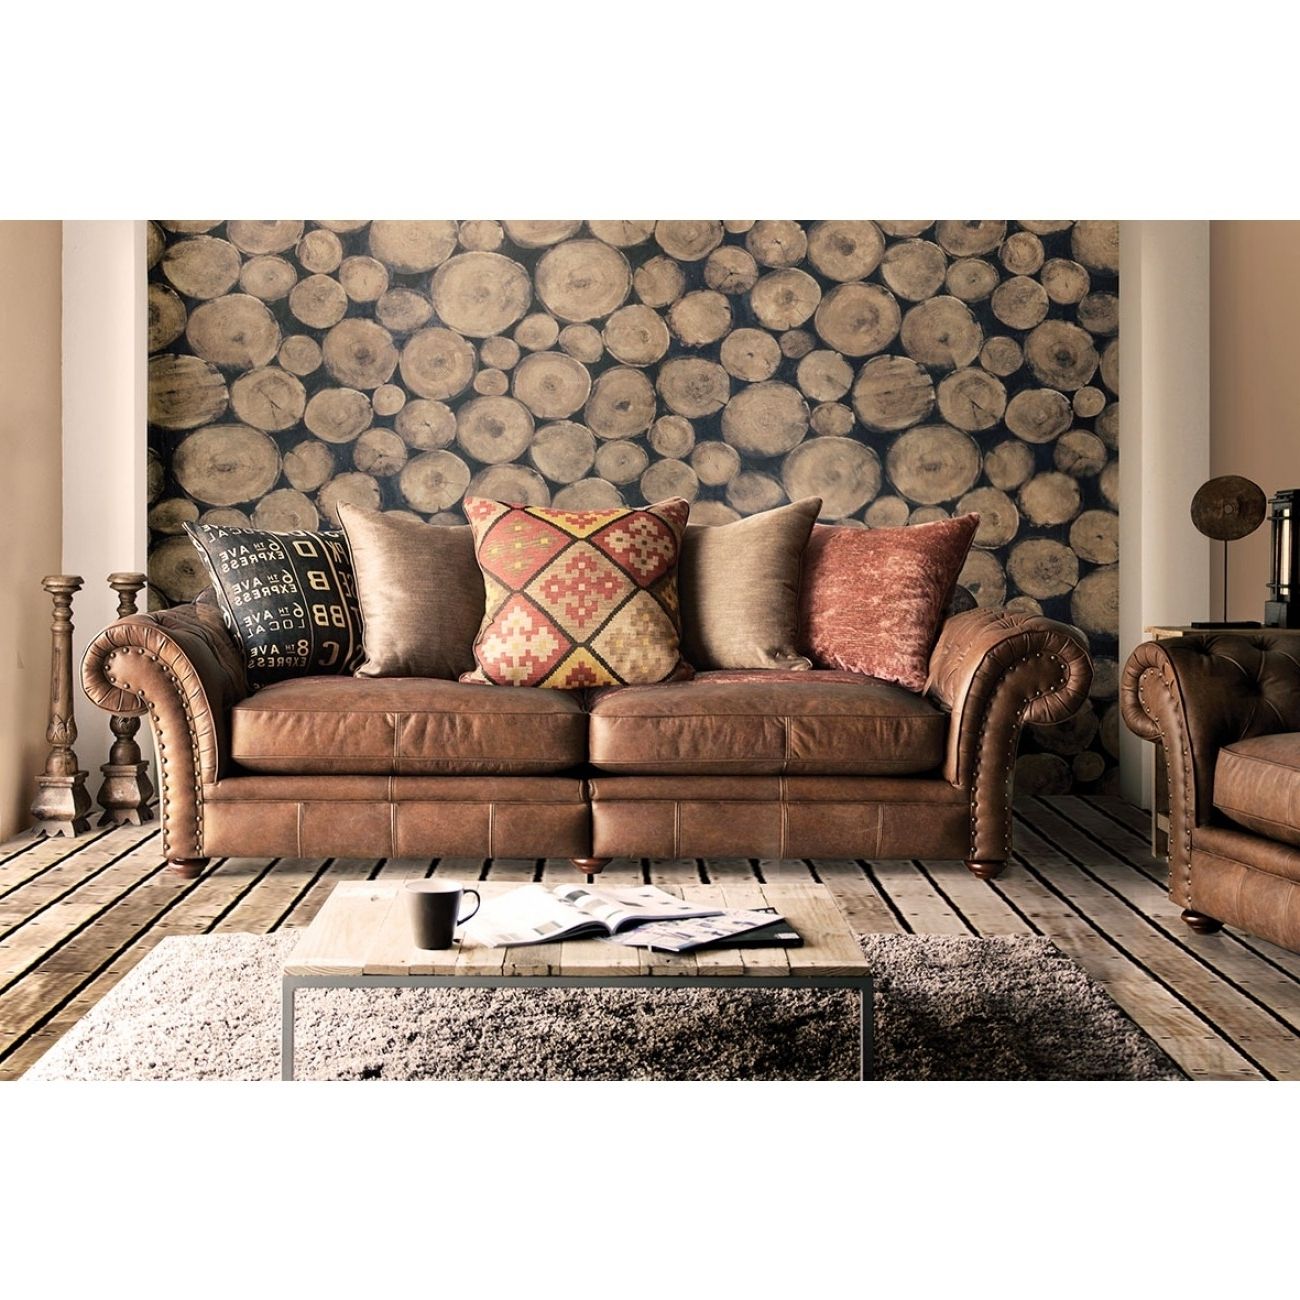 Famous Leather And Cloth Sofas • Leather Sofa Throughout Leather And Cloth Sofas (View 1 of 20)